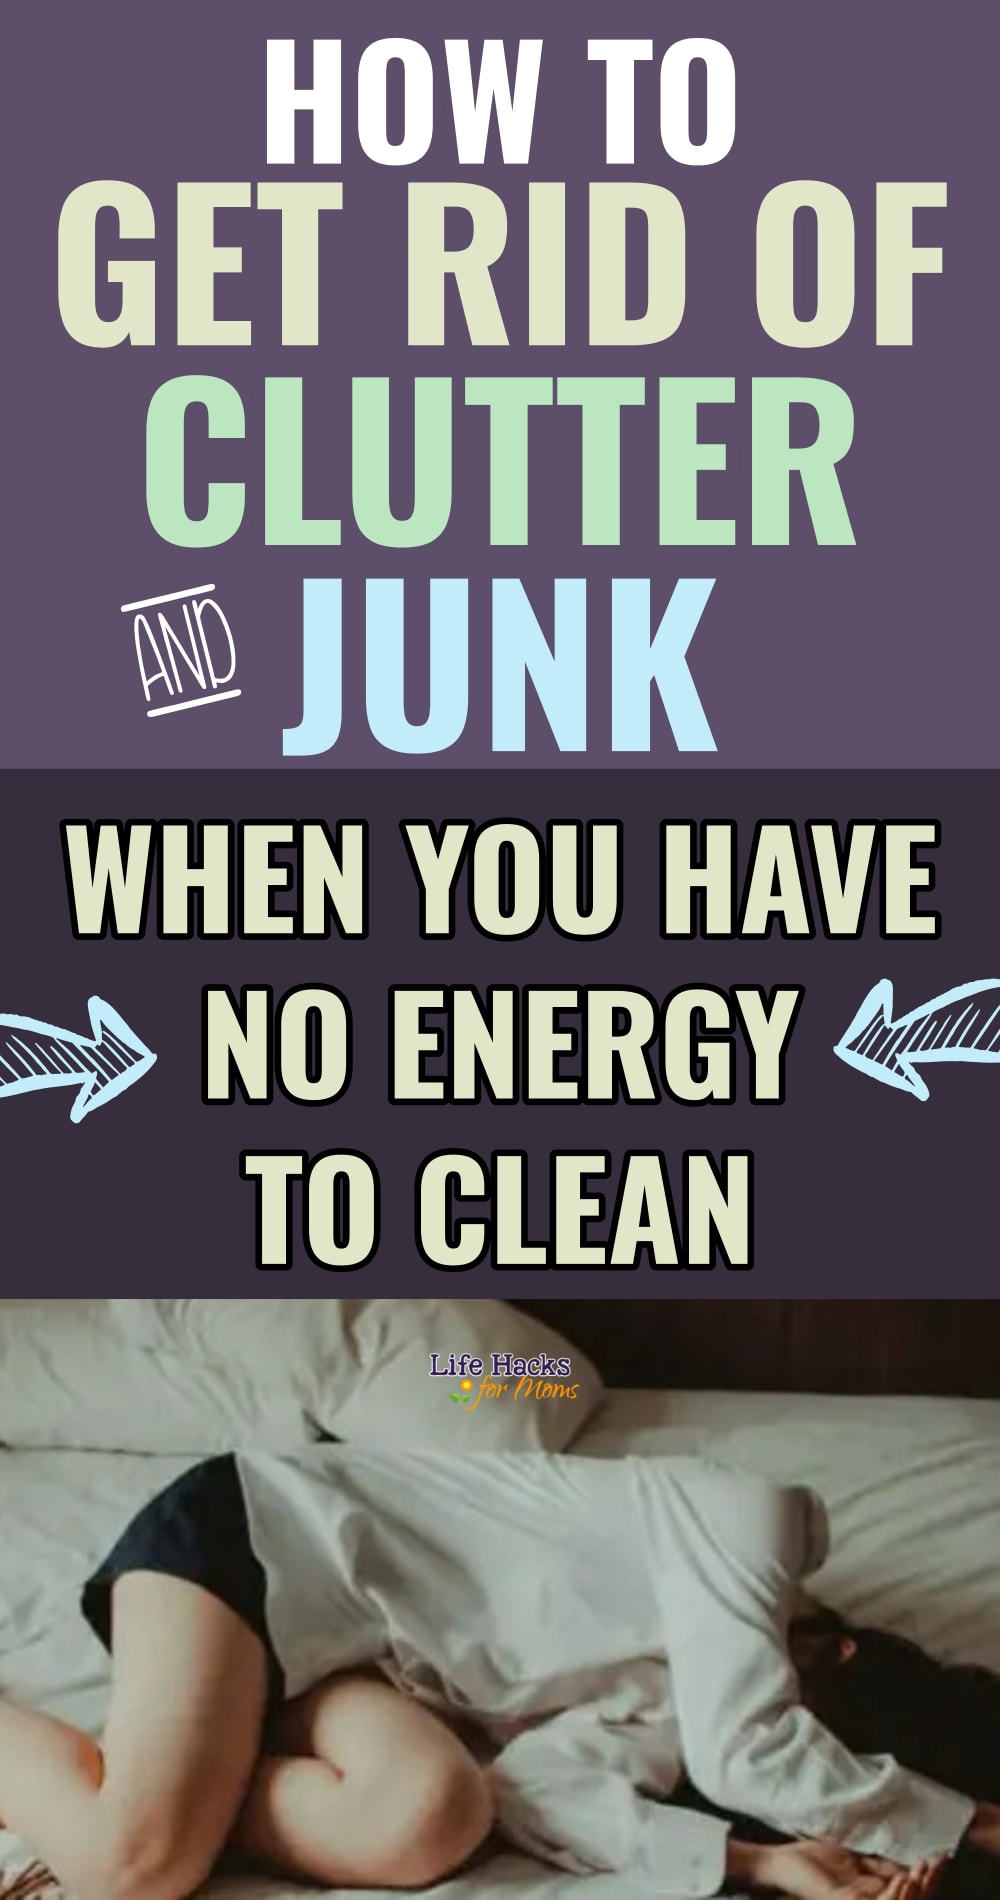 how to get rid of junk in your house